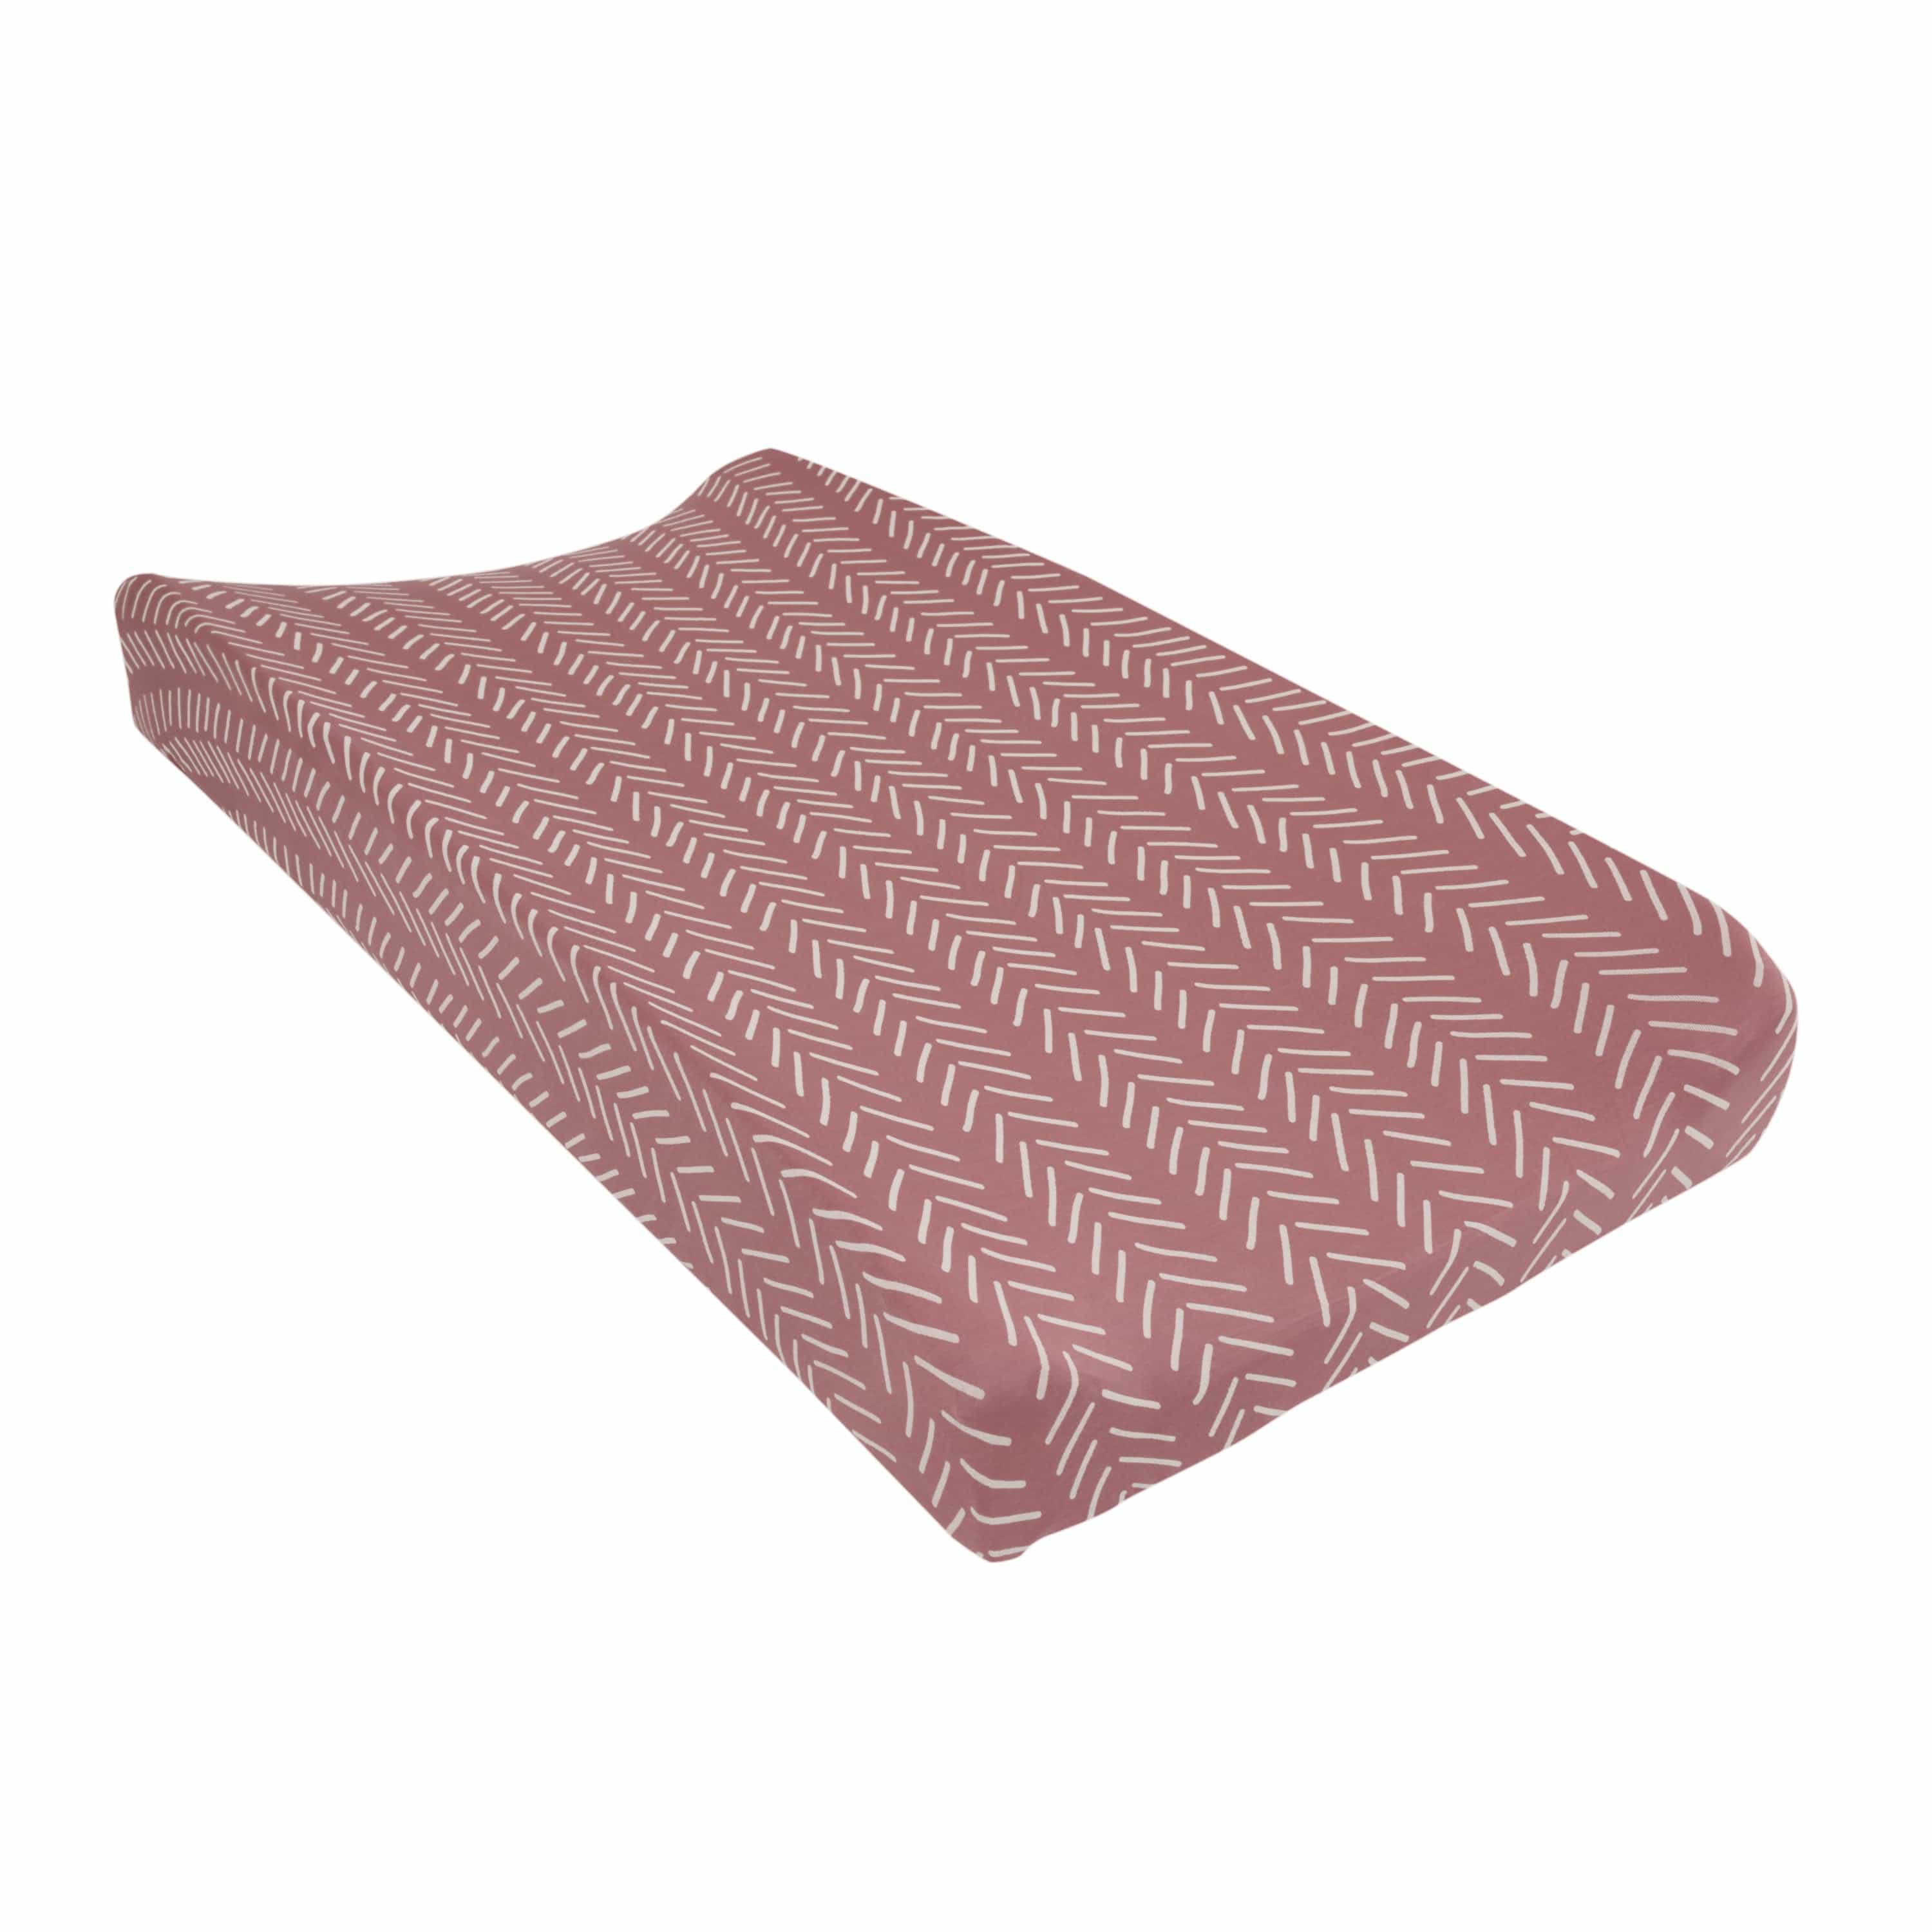 Kyte Baby Change Pad Cover Dusty Rose Herringbone / One Size Change Pad Cover in Dusty Rose Herringbone